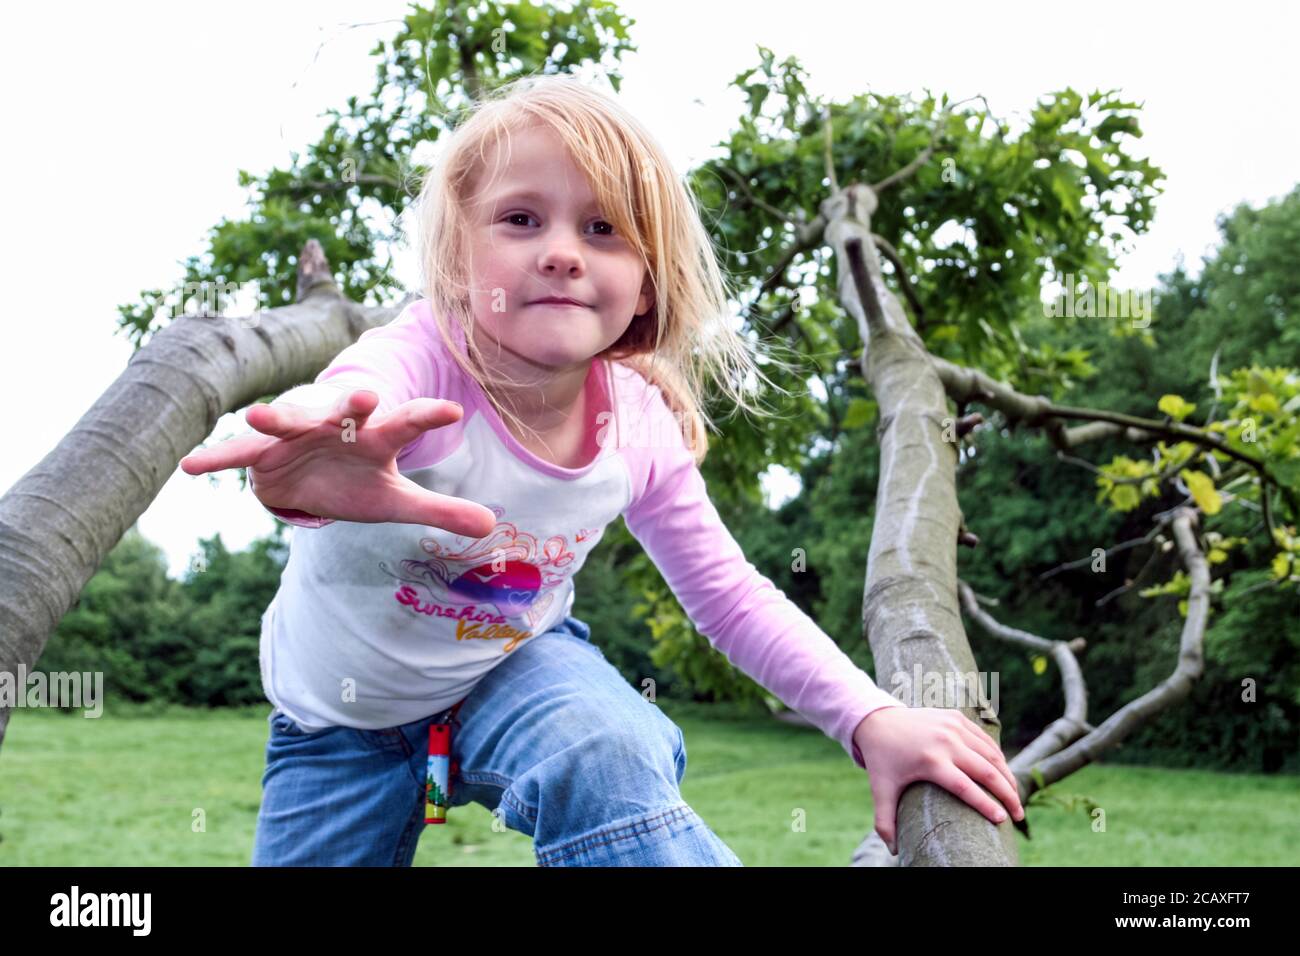 A 6-7 year old girl, climbing a tree and reaching out with her hand to the camera, London, UK Stock Photo